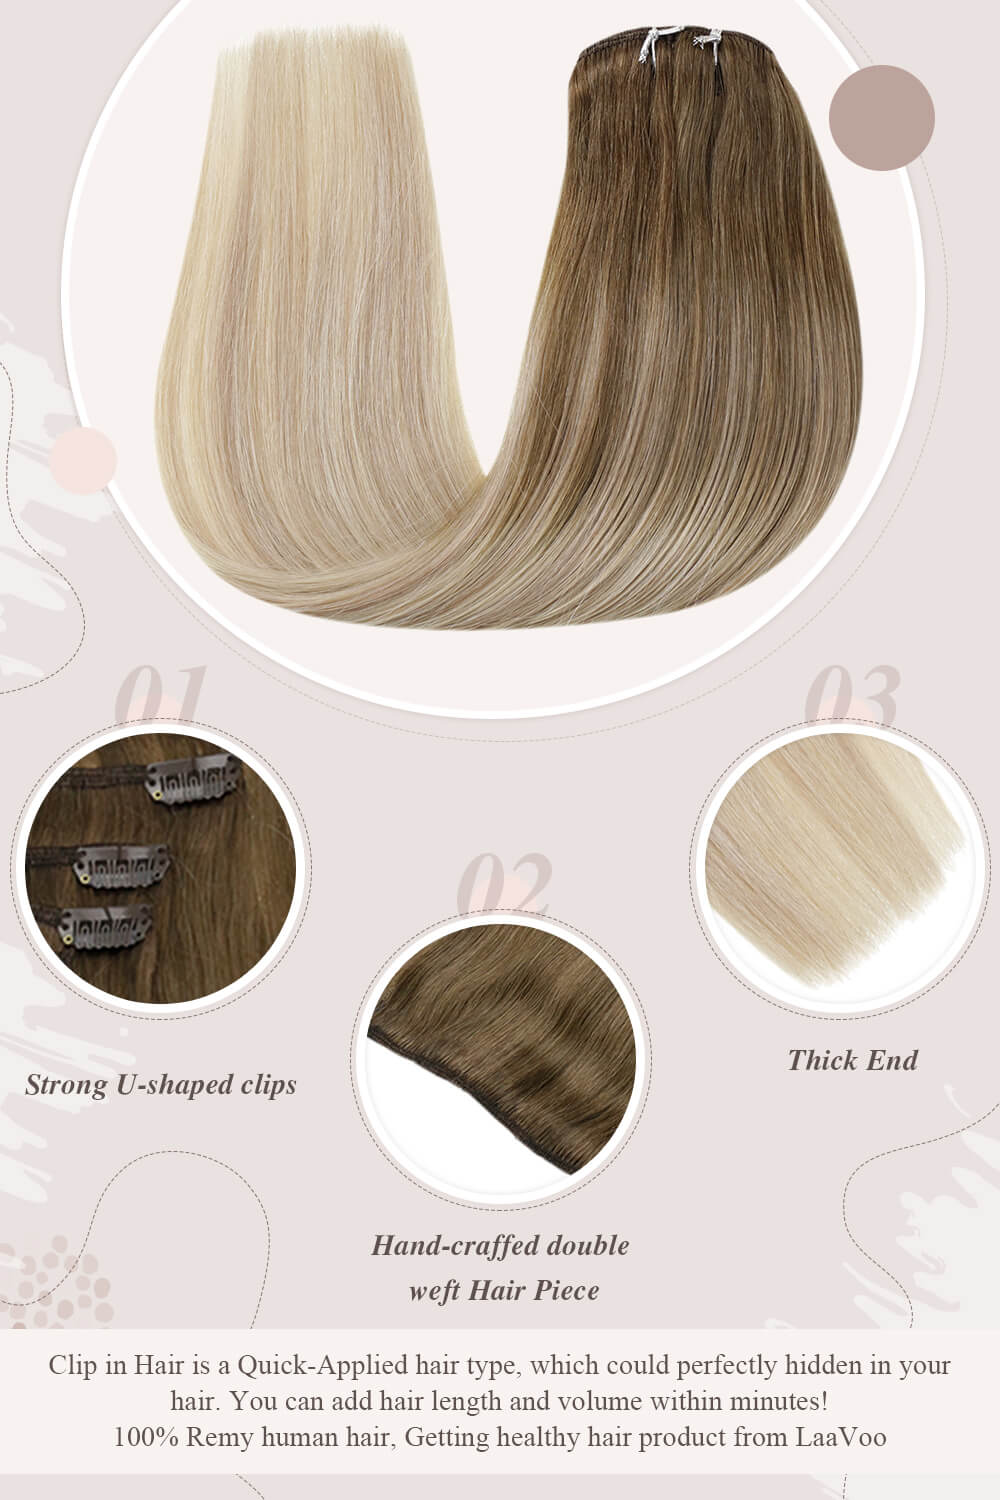 solid white blonde strong U shaped clips hand craffed double weft hair piece thick end clip in hair perfectly hidden in your hair you can add hair length and volume within minutes Remy human hair getting healthy hair